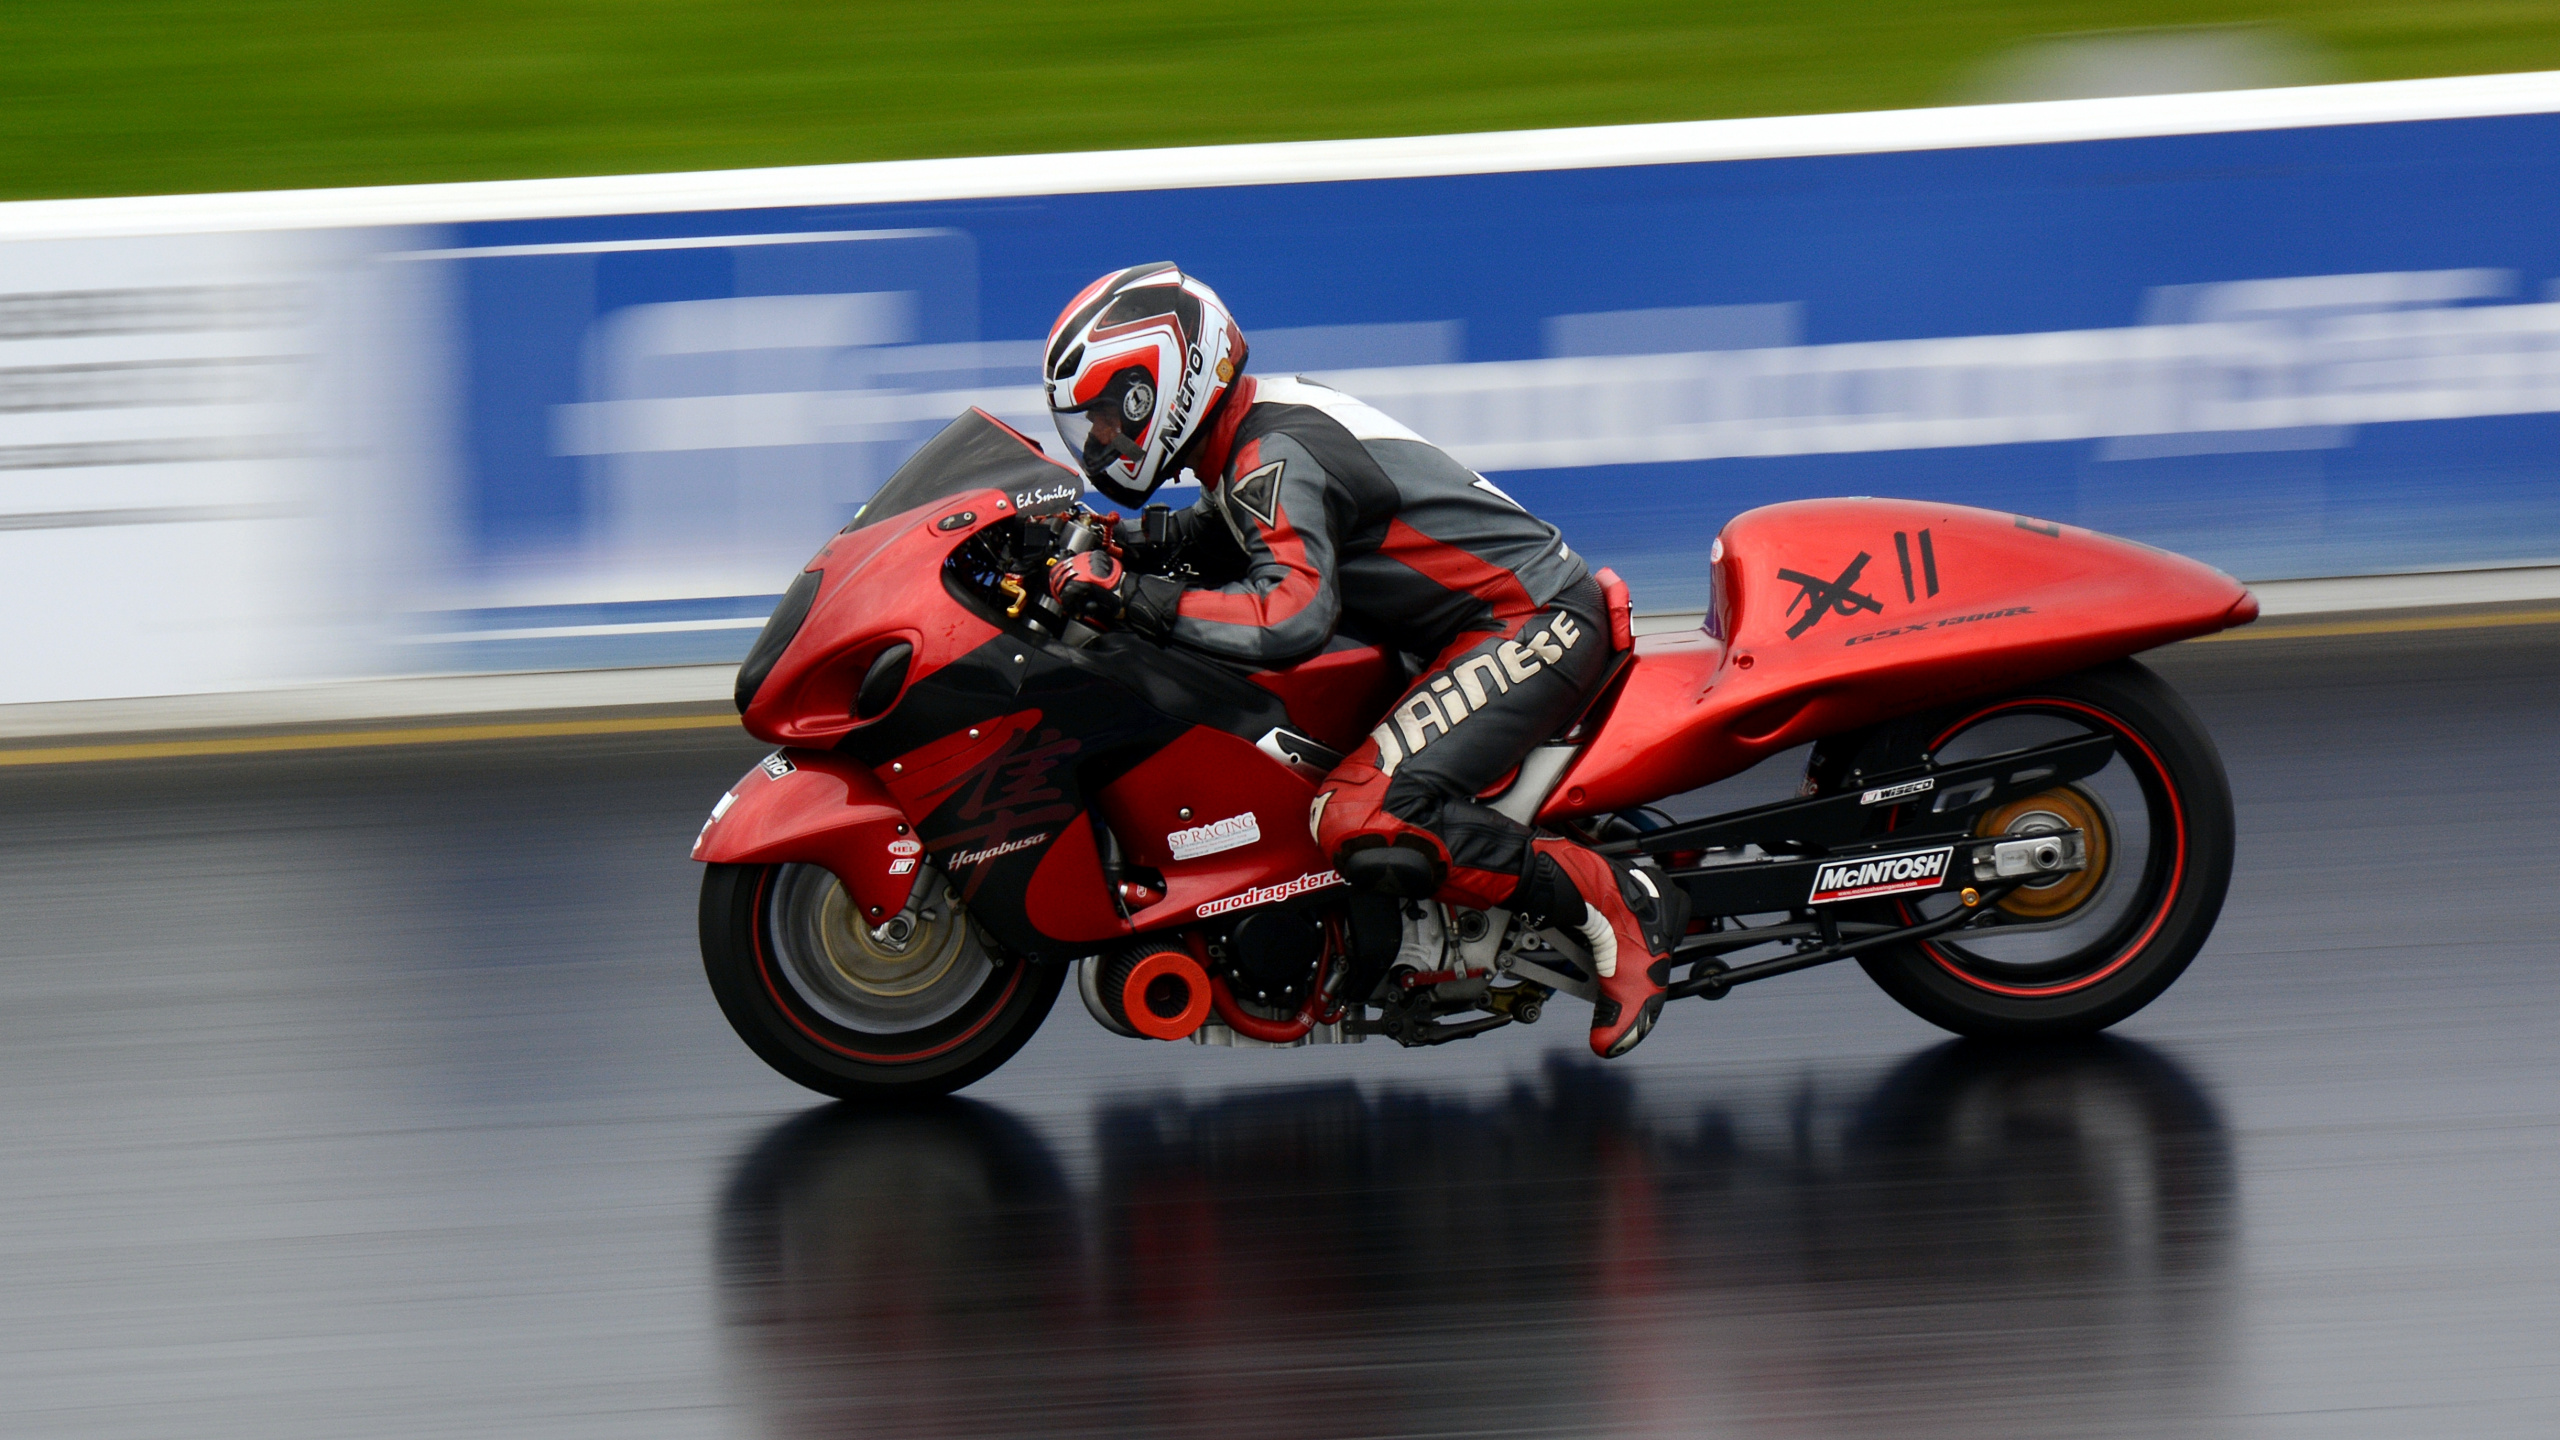 Man in Red and Black Motorcycle Helmet Riding Red Sports Bike. Wallpaper in 2560x1440 Resolution